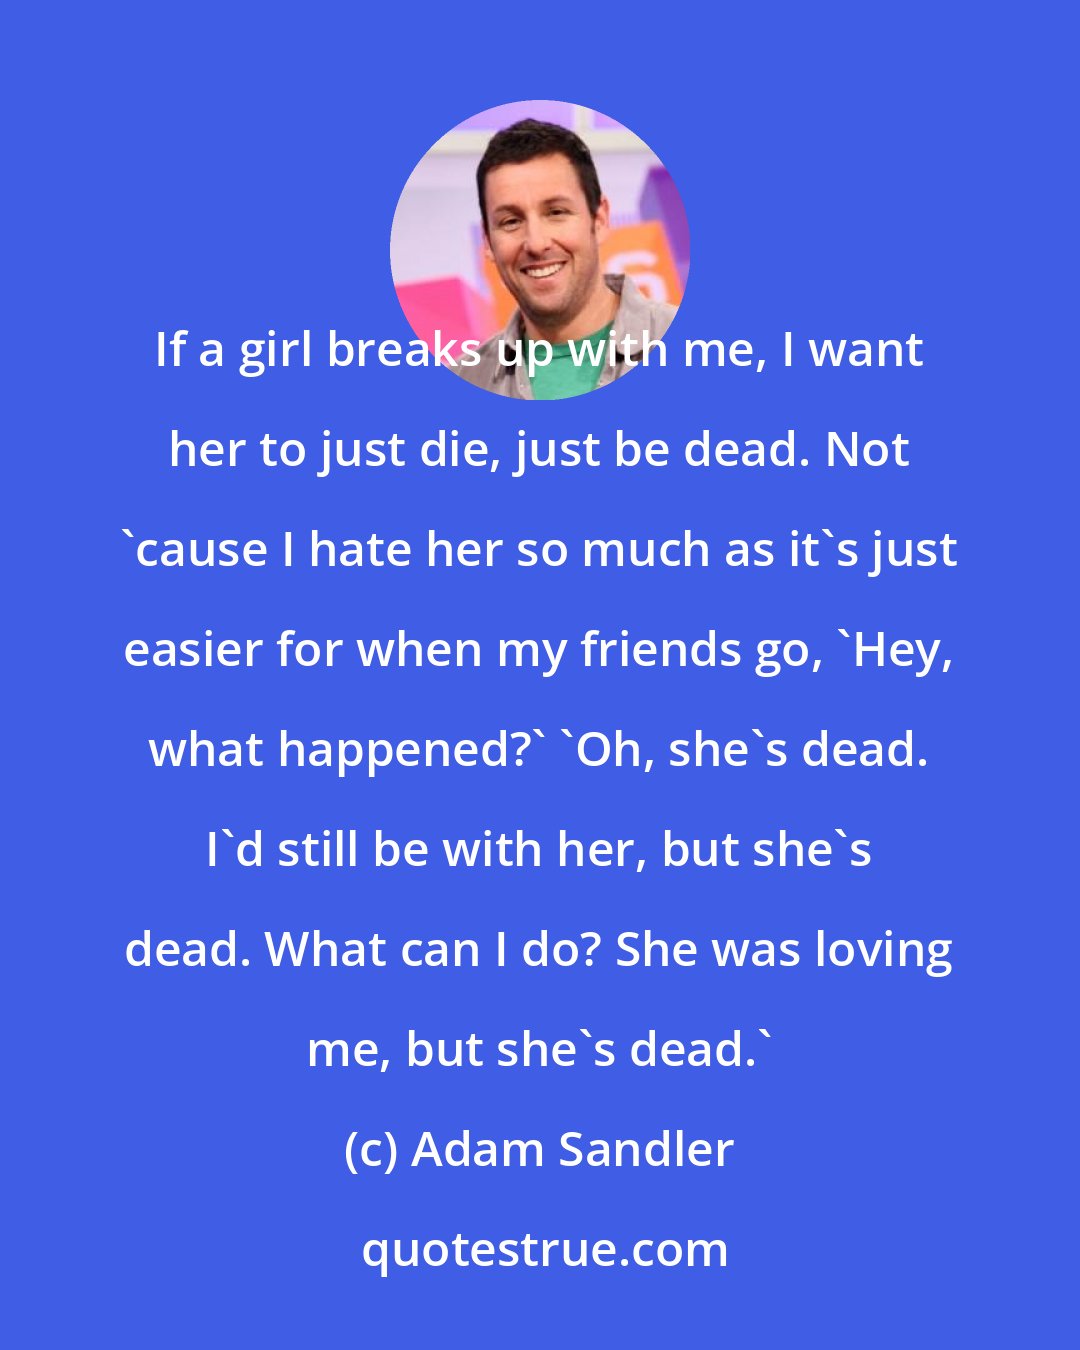 Adam Sandler: If a girl breaks up with me, I want her to just die, just be dead. Not 'cause I hate her so much as it's just easier for when my friends go, 'Hey, what happened?' 'Oh, she's dead. I'd still be with her, but she's dead. What can I do? She was loving me, but she's dead.'